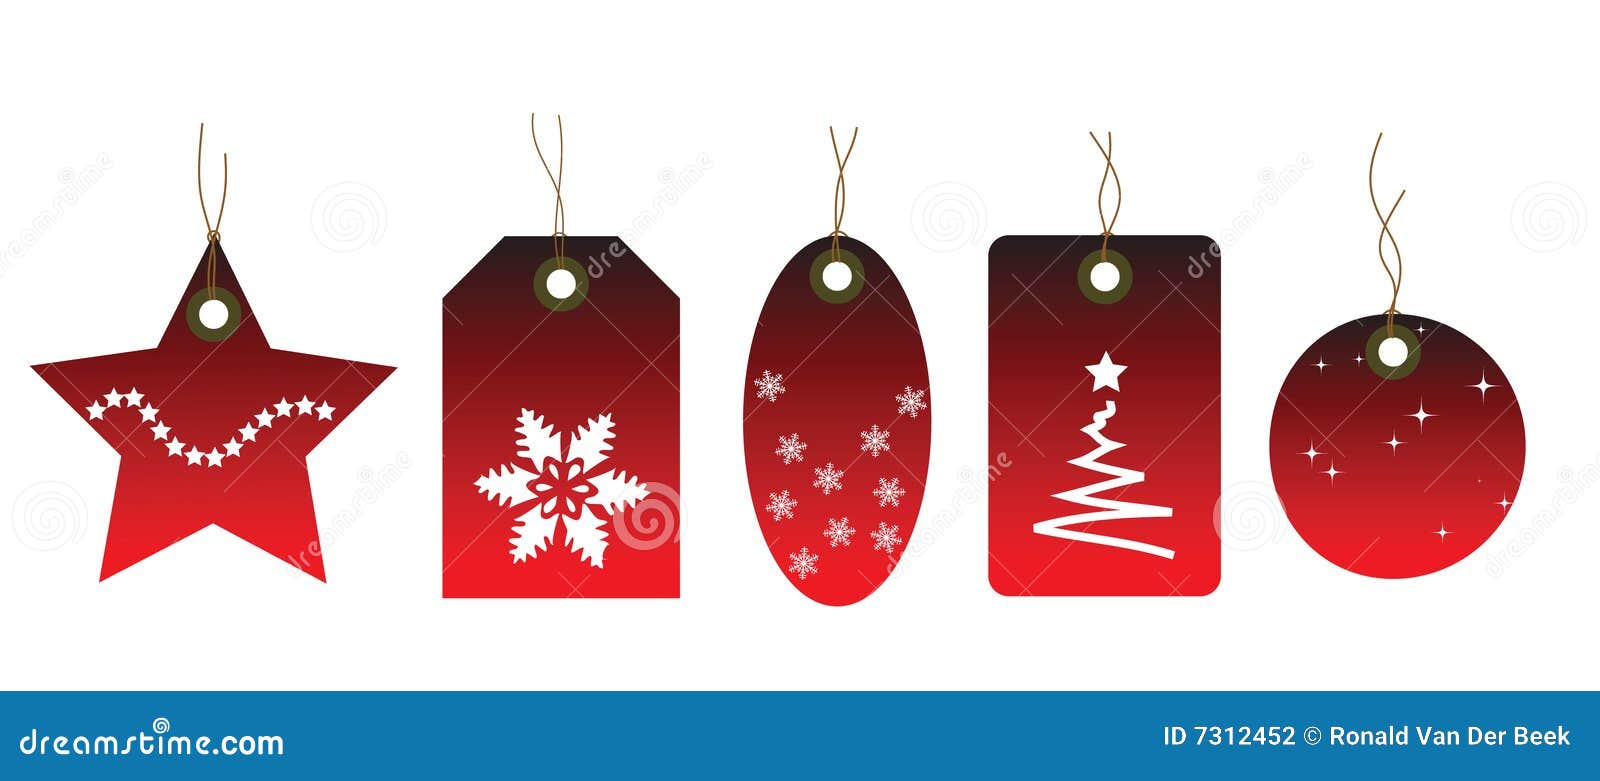 christmas-themed-price-tags-stock-illustration-illustration-of-snow